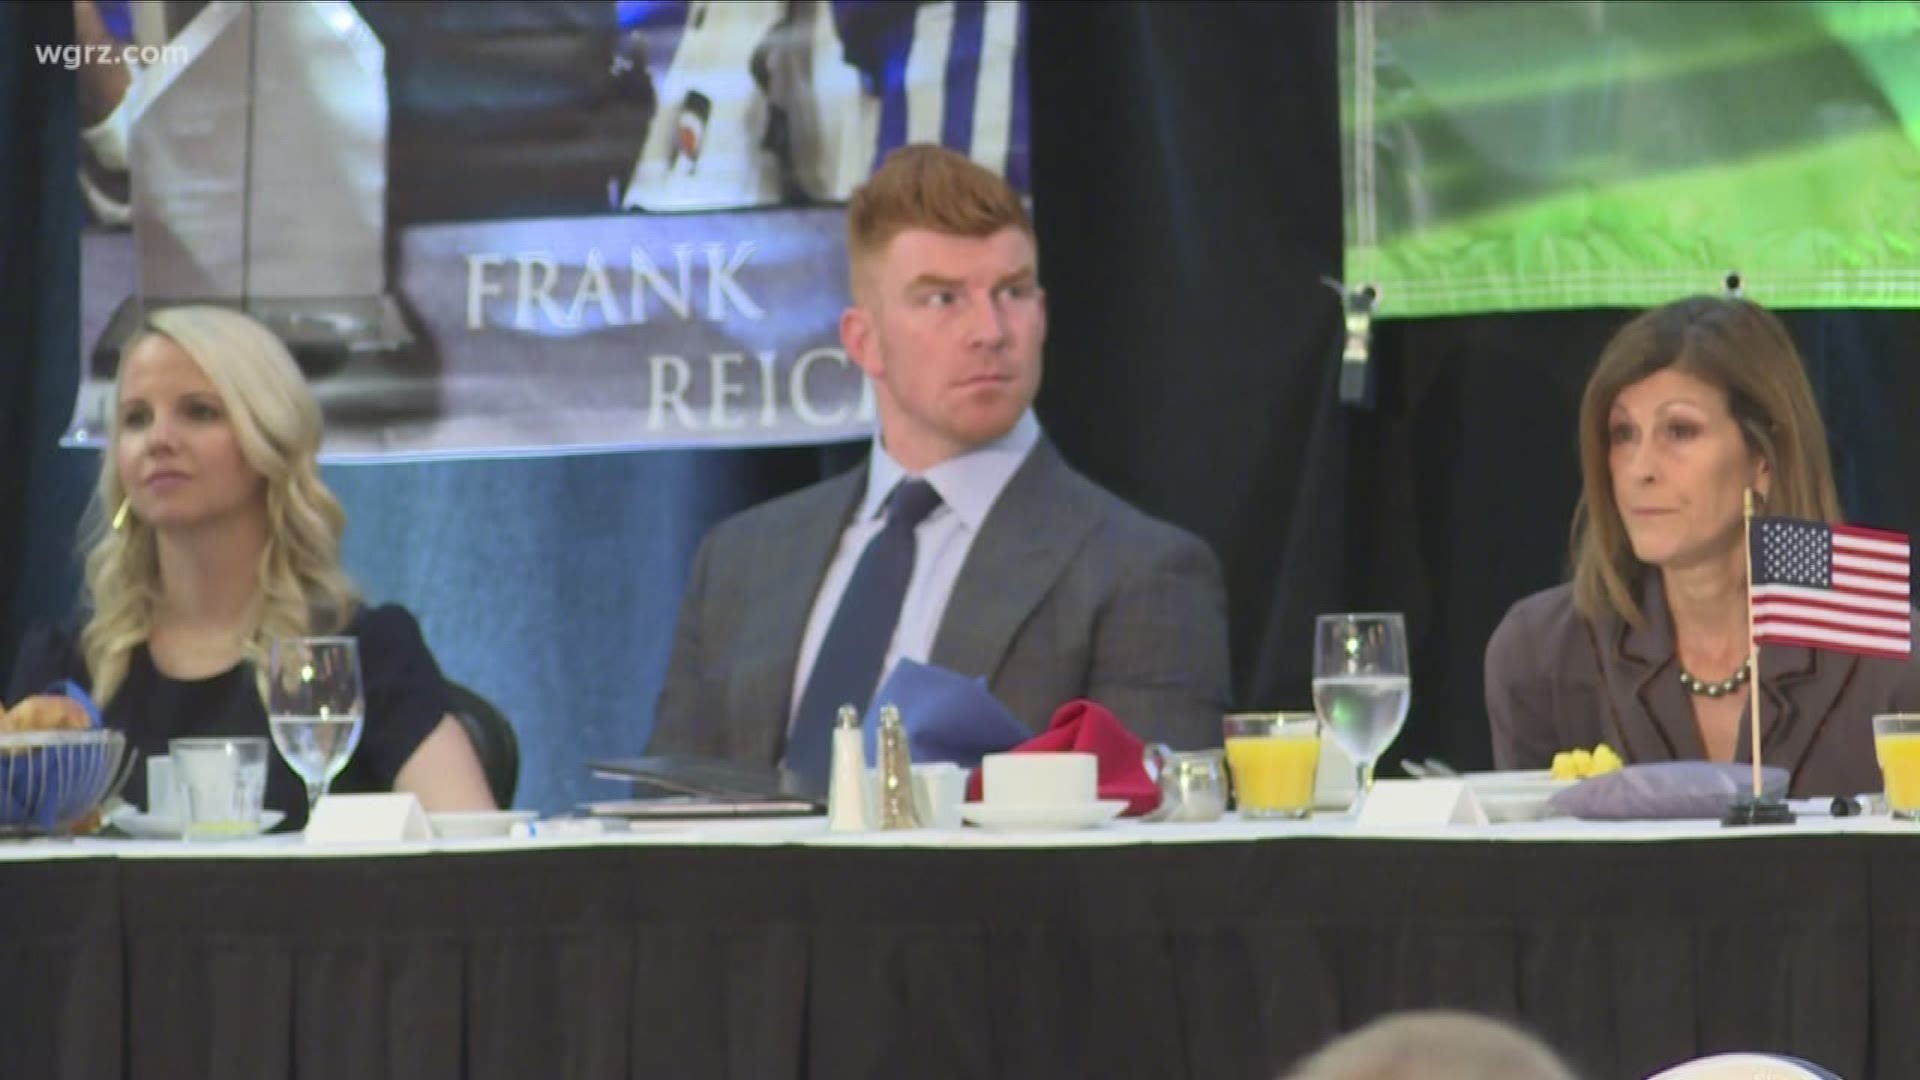 Bengals Quarterback Andy Dalton received the Call to Courage Award after money poured into his foundation and he gave part of that money to Roswell Park Comprehensive Cancer Center.